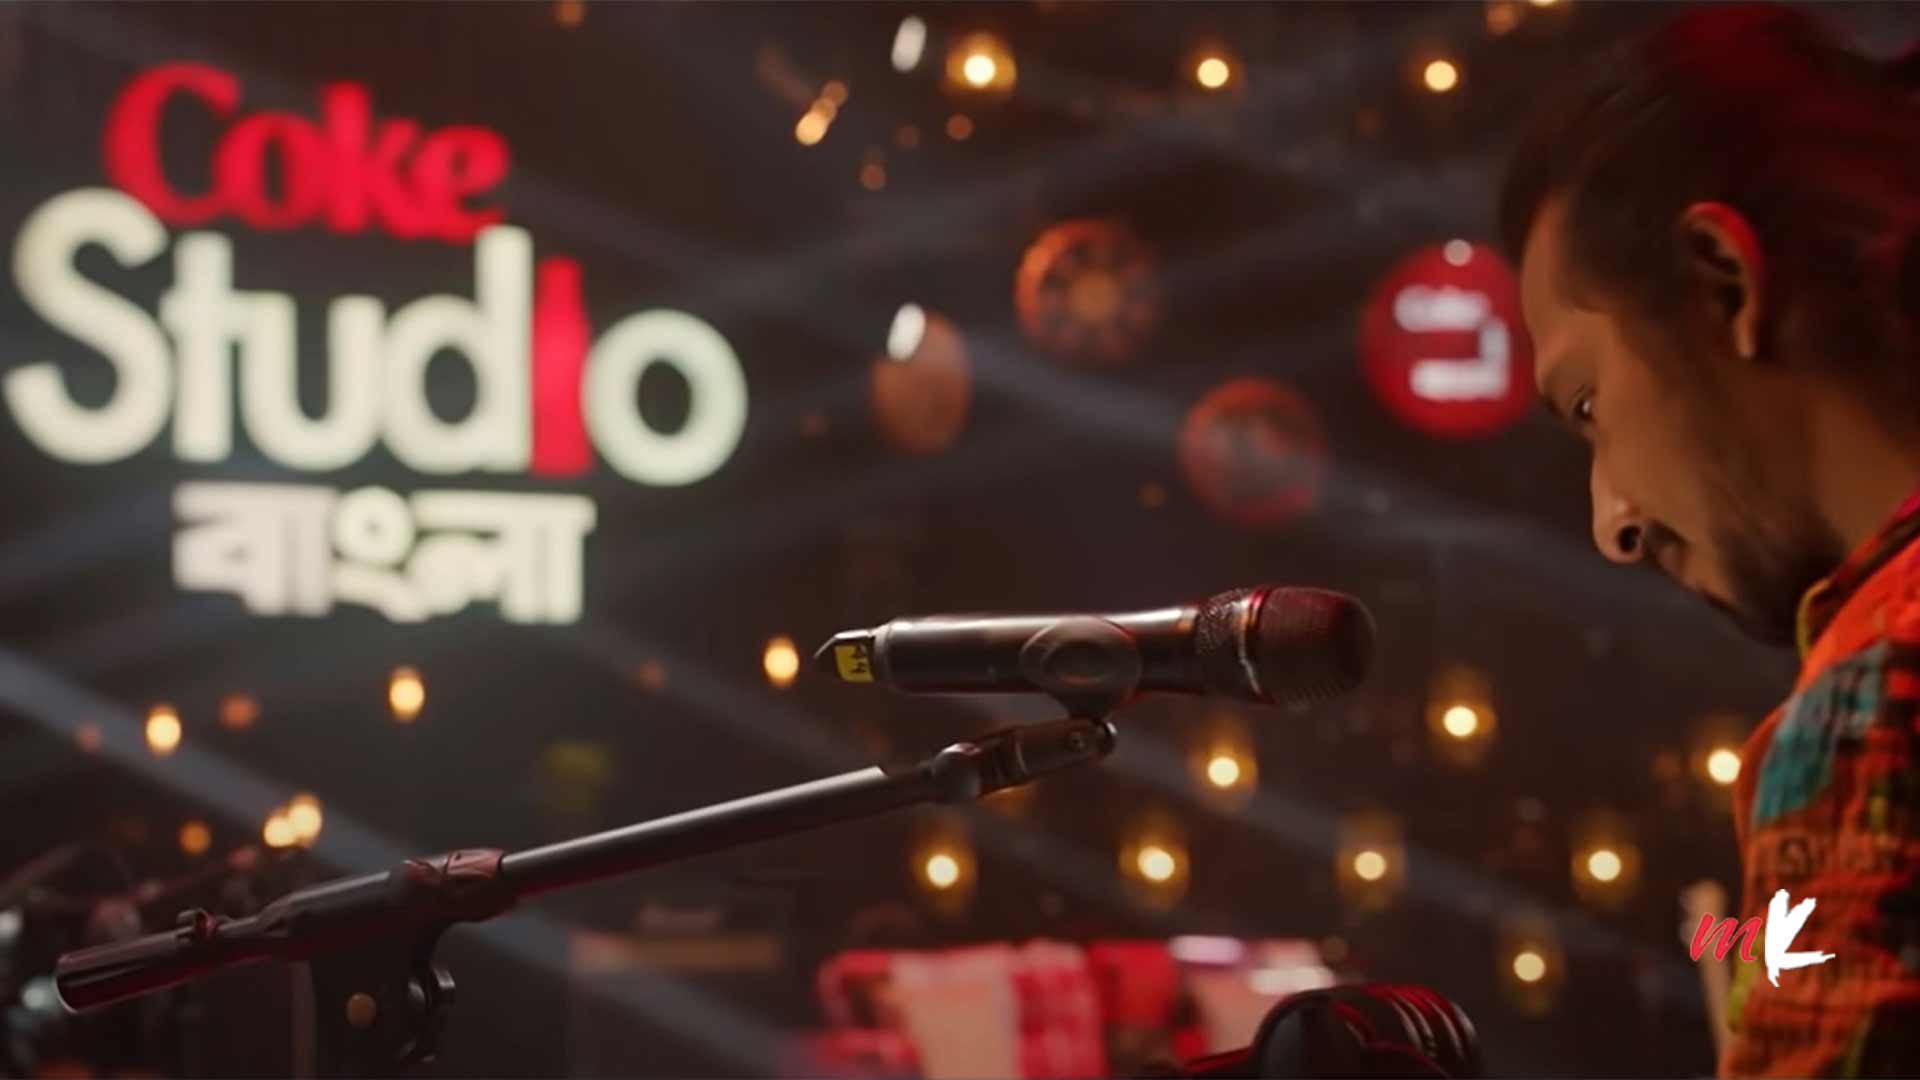 Coke Studio launched in Pakistan in 2008, in India in 2011, and looks set to win hearts in Bangladesh too